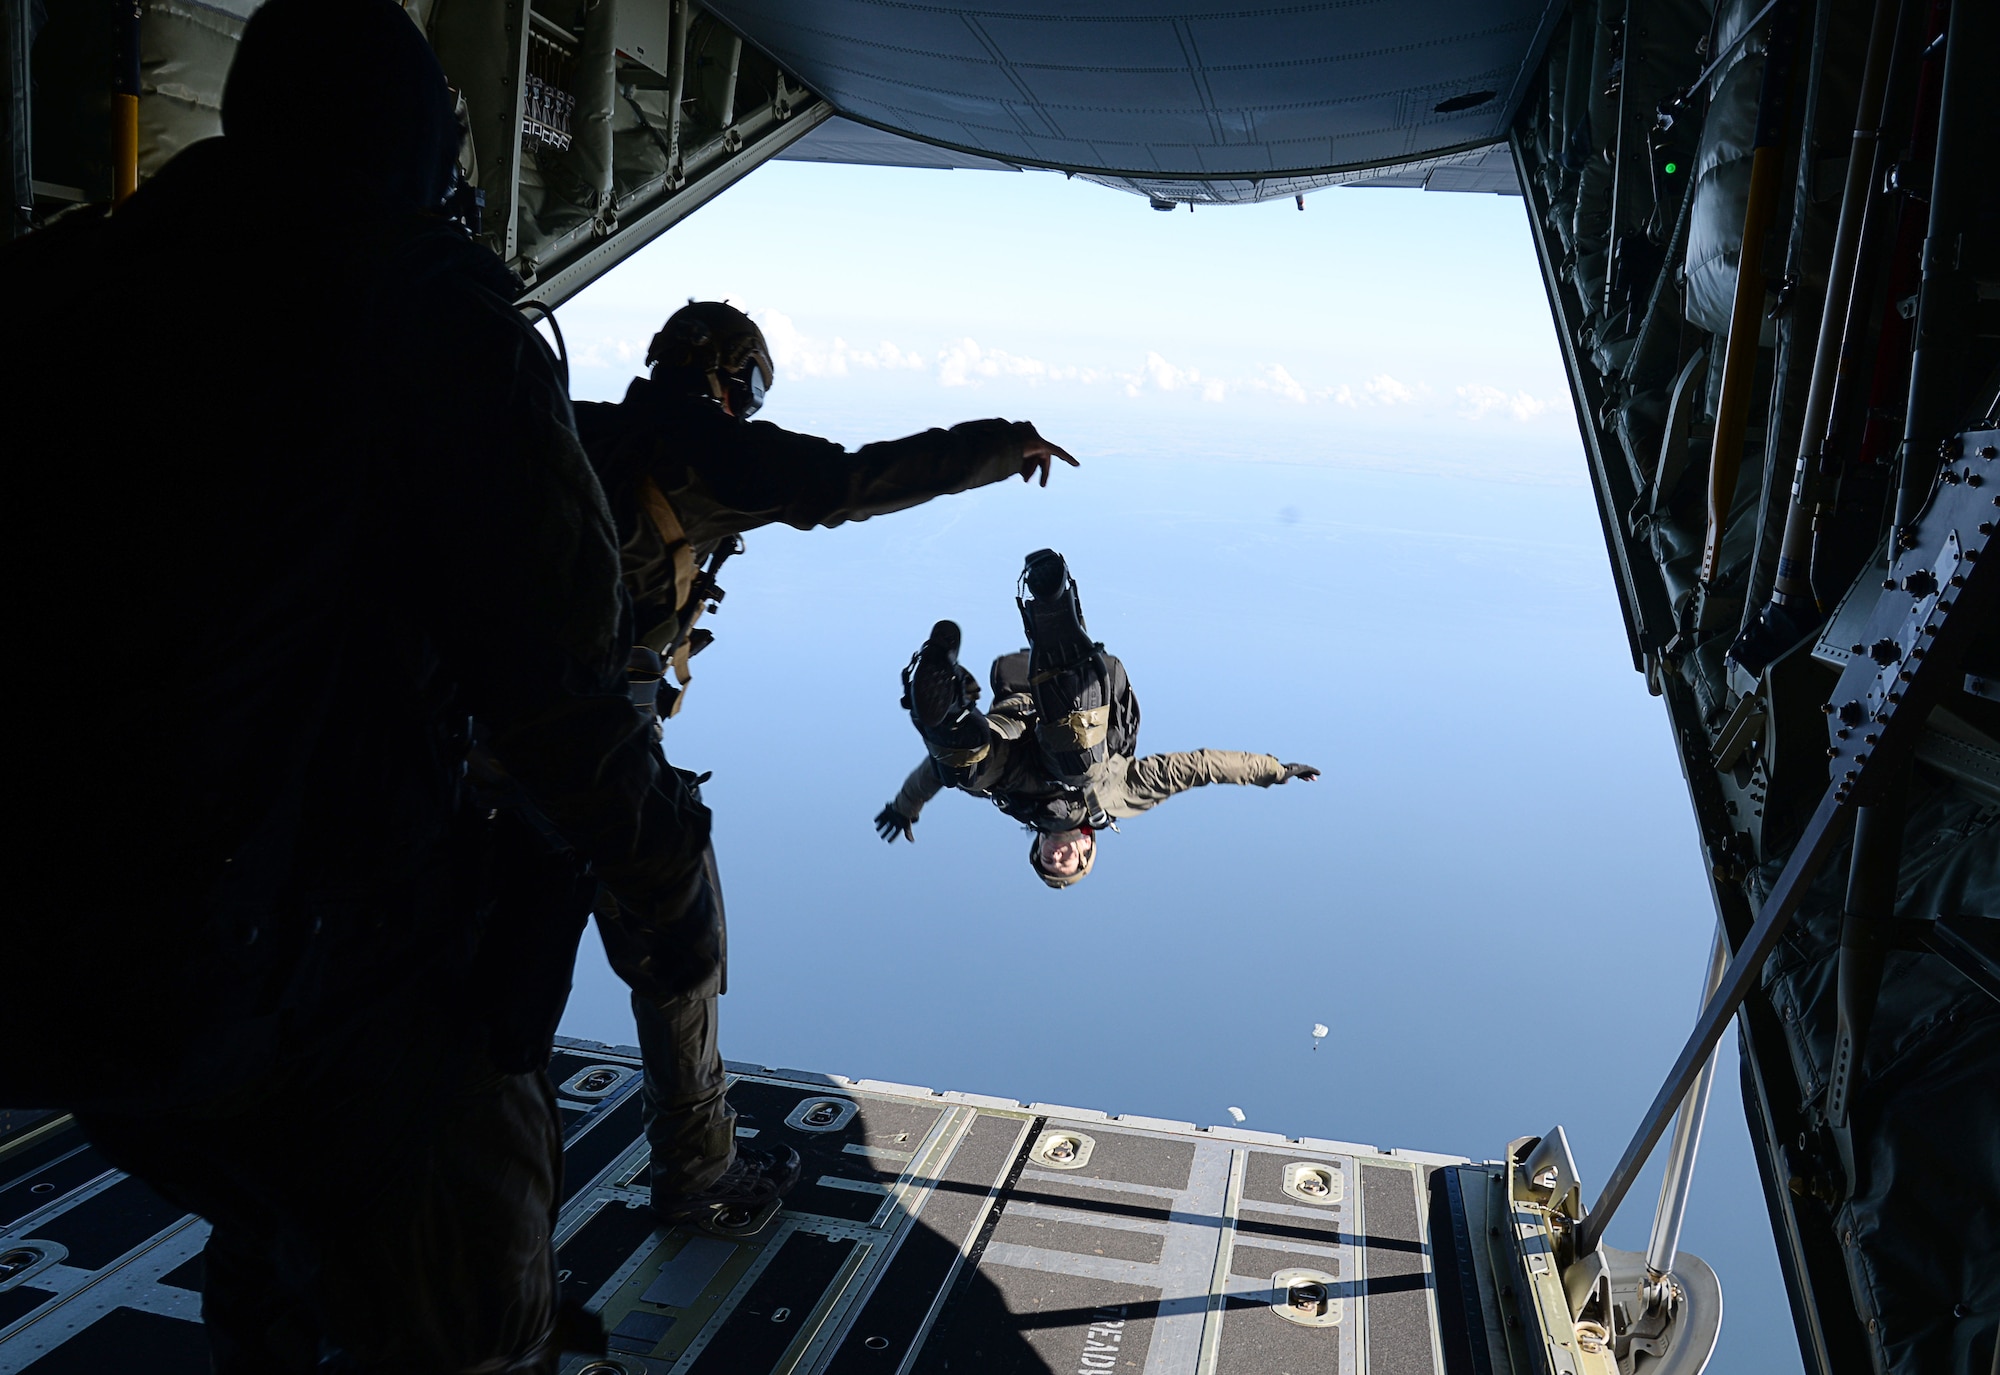 A U.S. Air Force Air Commando assigned to the 352nd Special Operations Wing conducts a free fall from an MC-130J Commando II assigned to the 67th Special Operations Squadron, over the Little Belt Strait in Denmark Sept. 27, 2016. Airmen from RAF Mildenhall, England and U.S. Navy Special Warfare Combatant-Craft crewmen worked with Danish air commandos during the 2016 Night Hawk exercise testing joint force capabilities. (U.S. Air Force photo by Senior Airman Justine Rho)